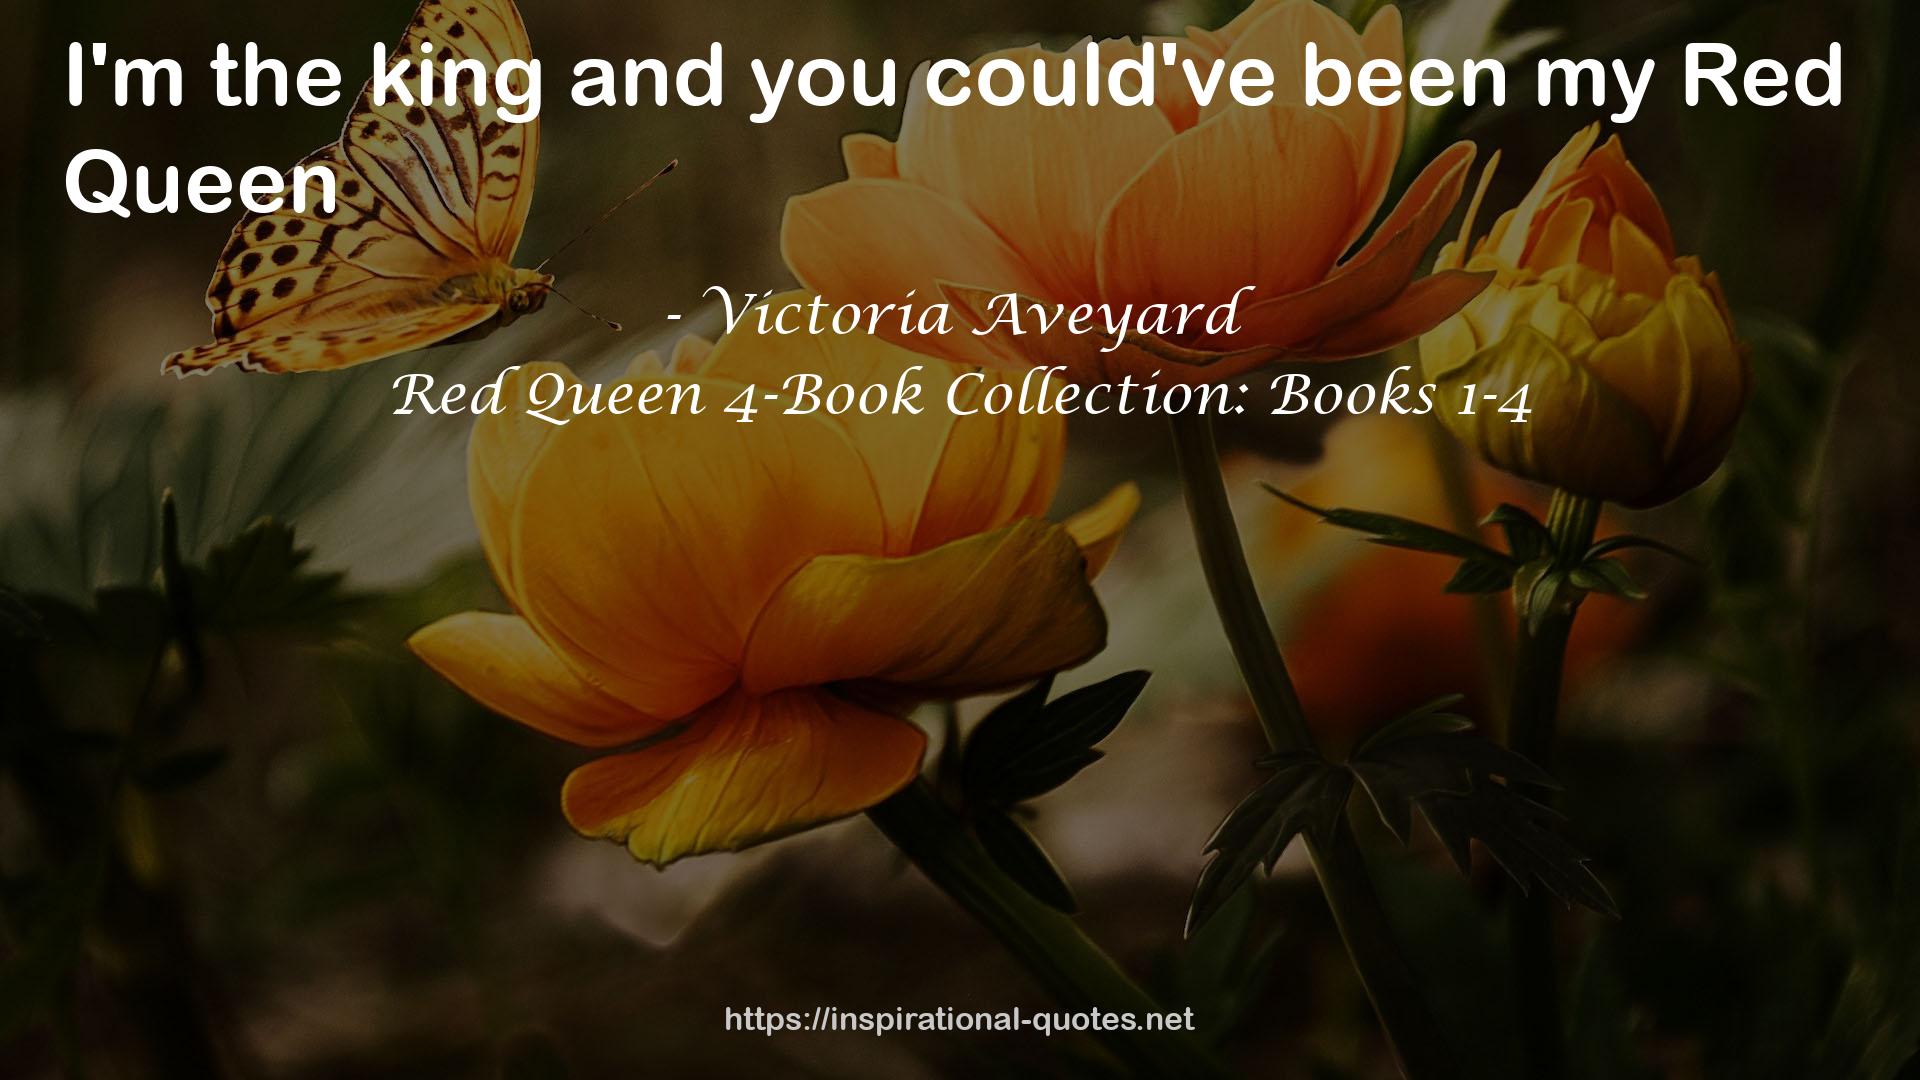 Red Queen 4-Book Collection: Books 1-4 QUOTES